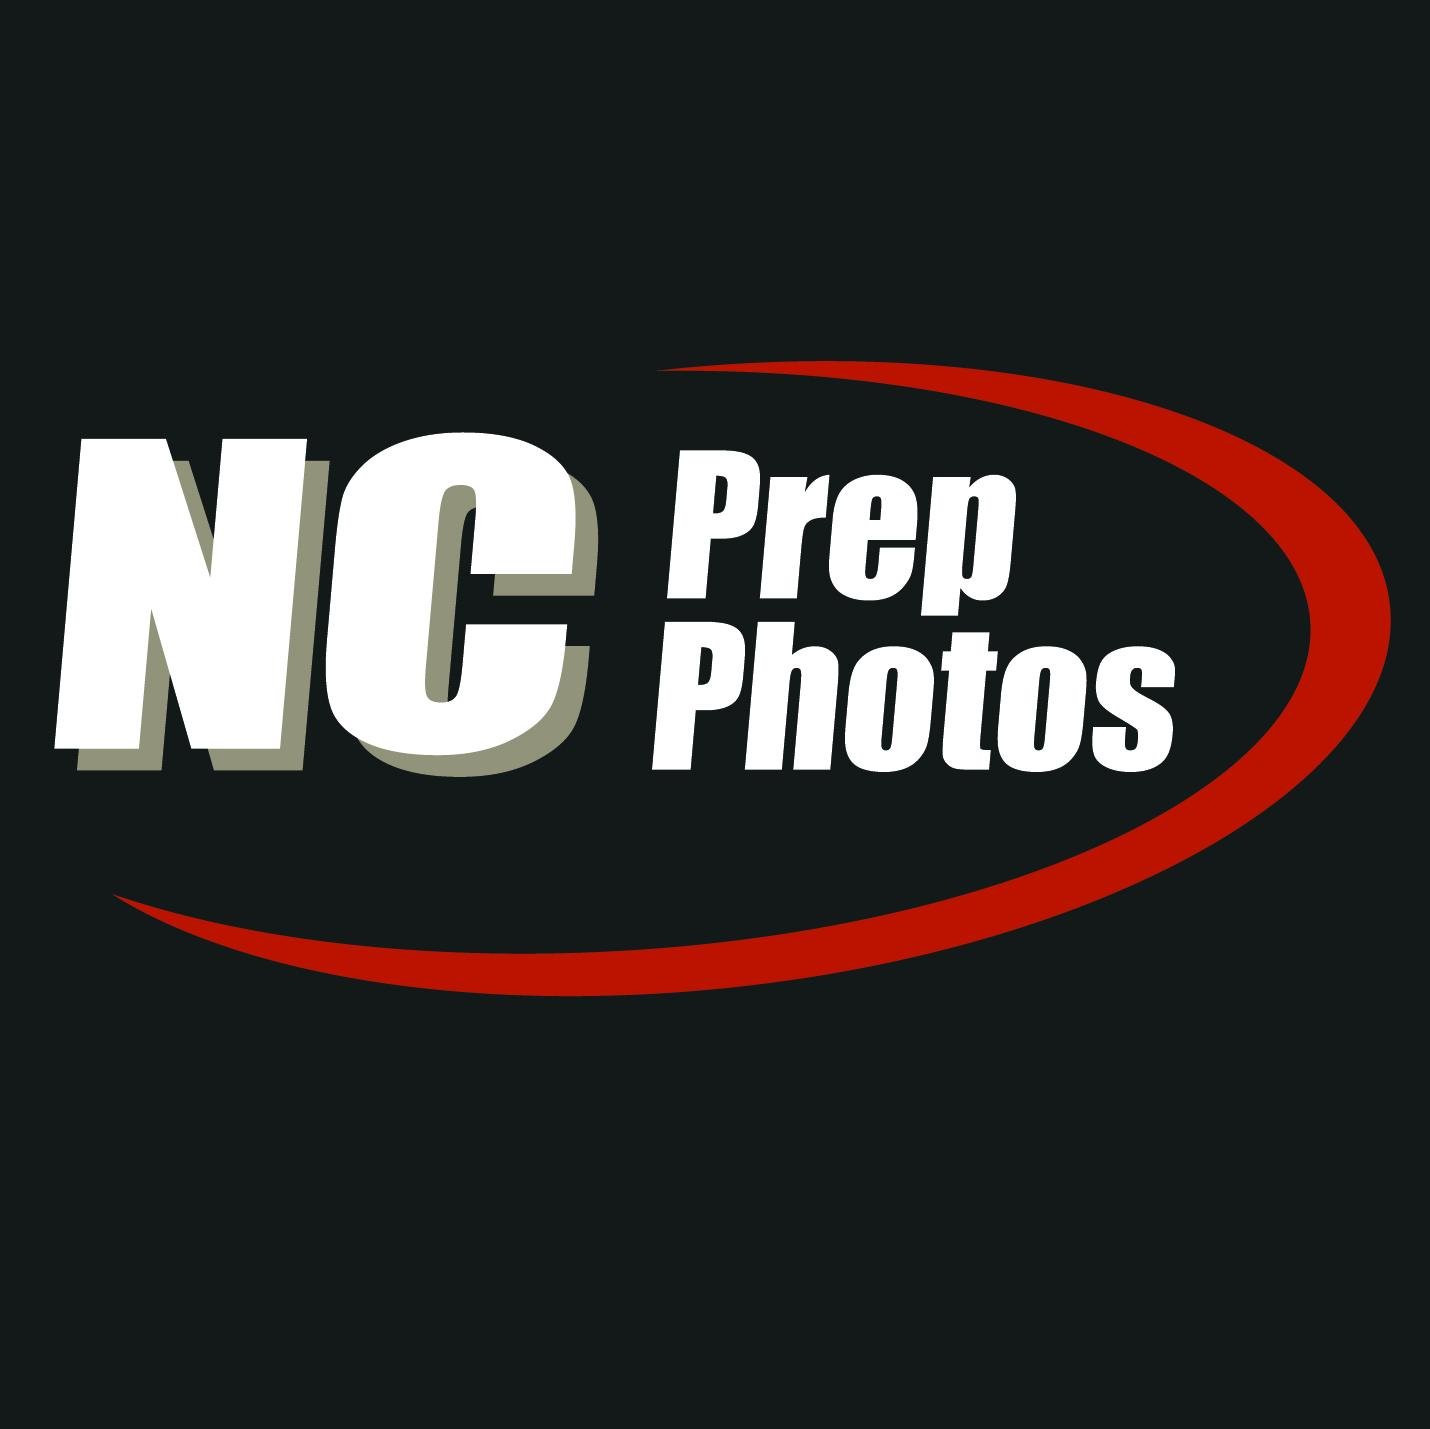 We have been providing professional sports photography in the Clemmons, Lewisville and Winston-Salem area for years.